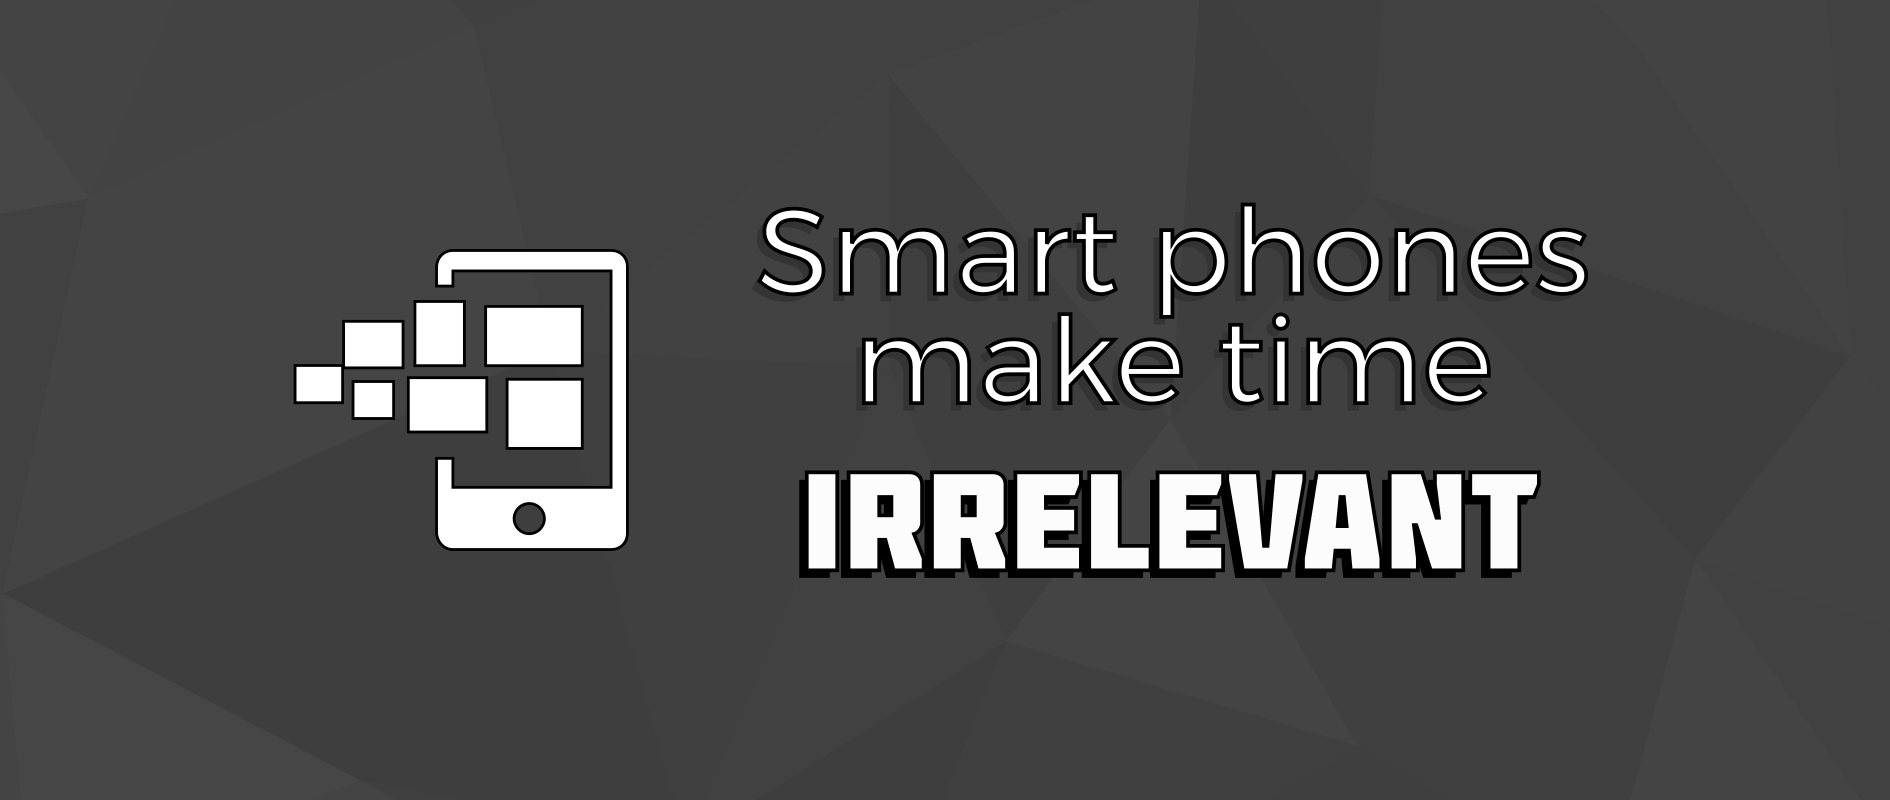 How a smart phone makes time irrelevant